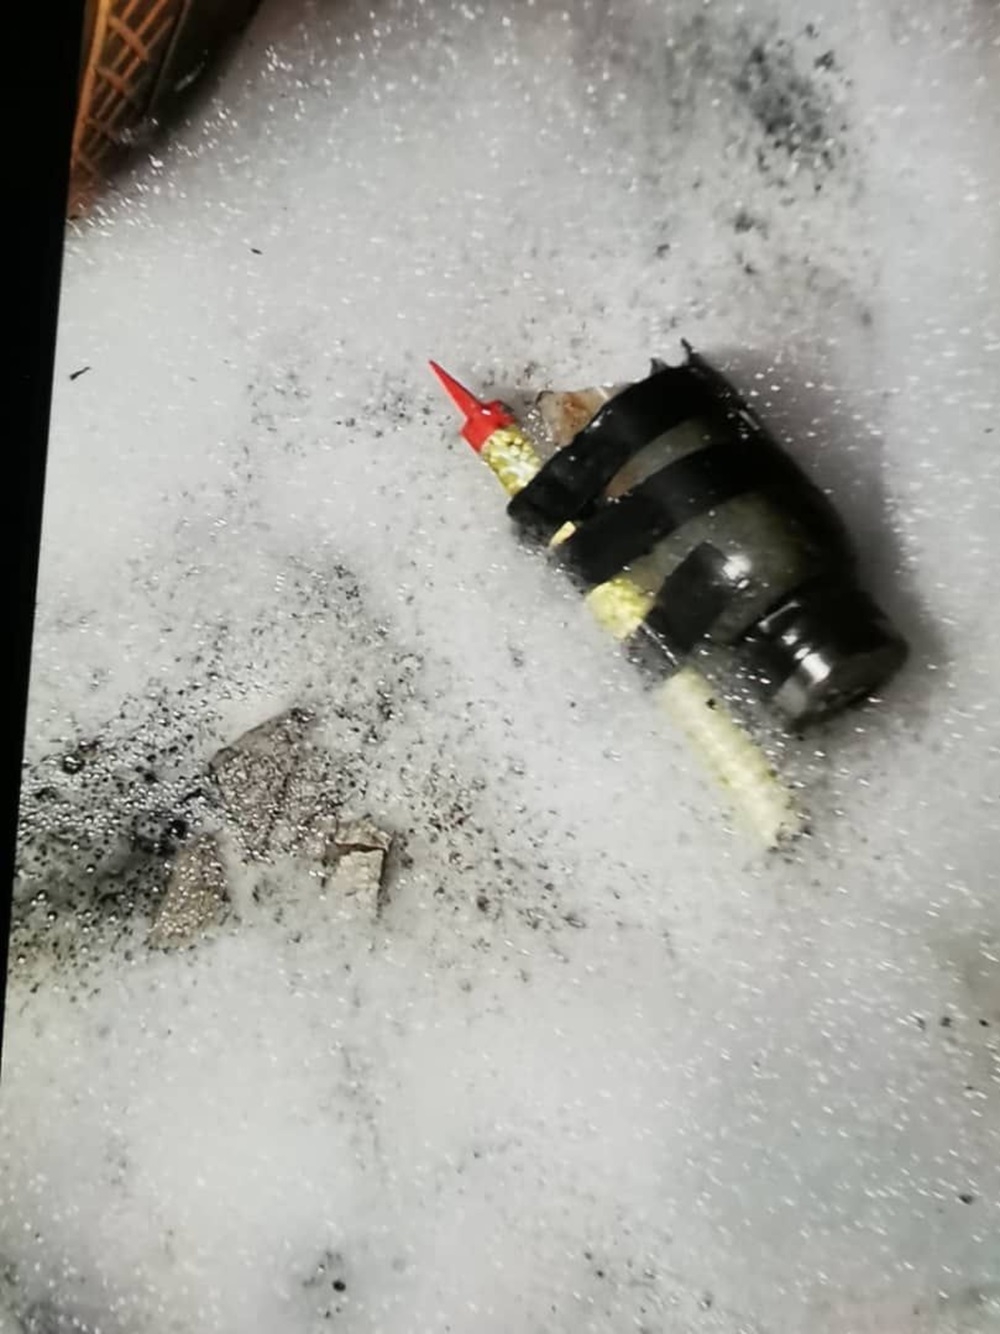 Cops found a Molotov cocktail in the fire incident at Beruas MP Ngeh Koo Ham’s house in Ayer Tawar near Manjung. ― Picture courtesy of Perak police